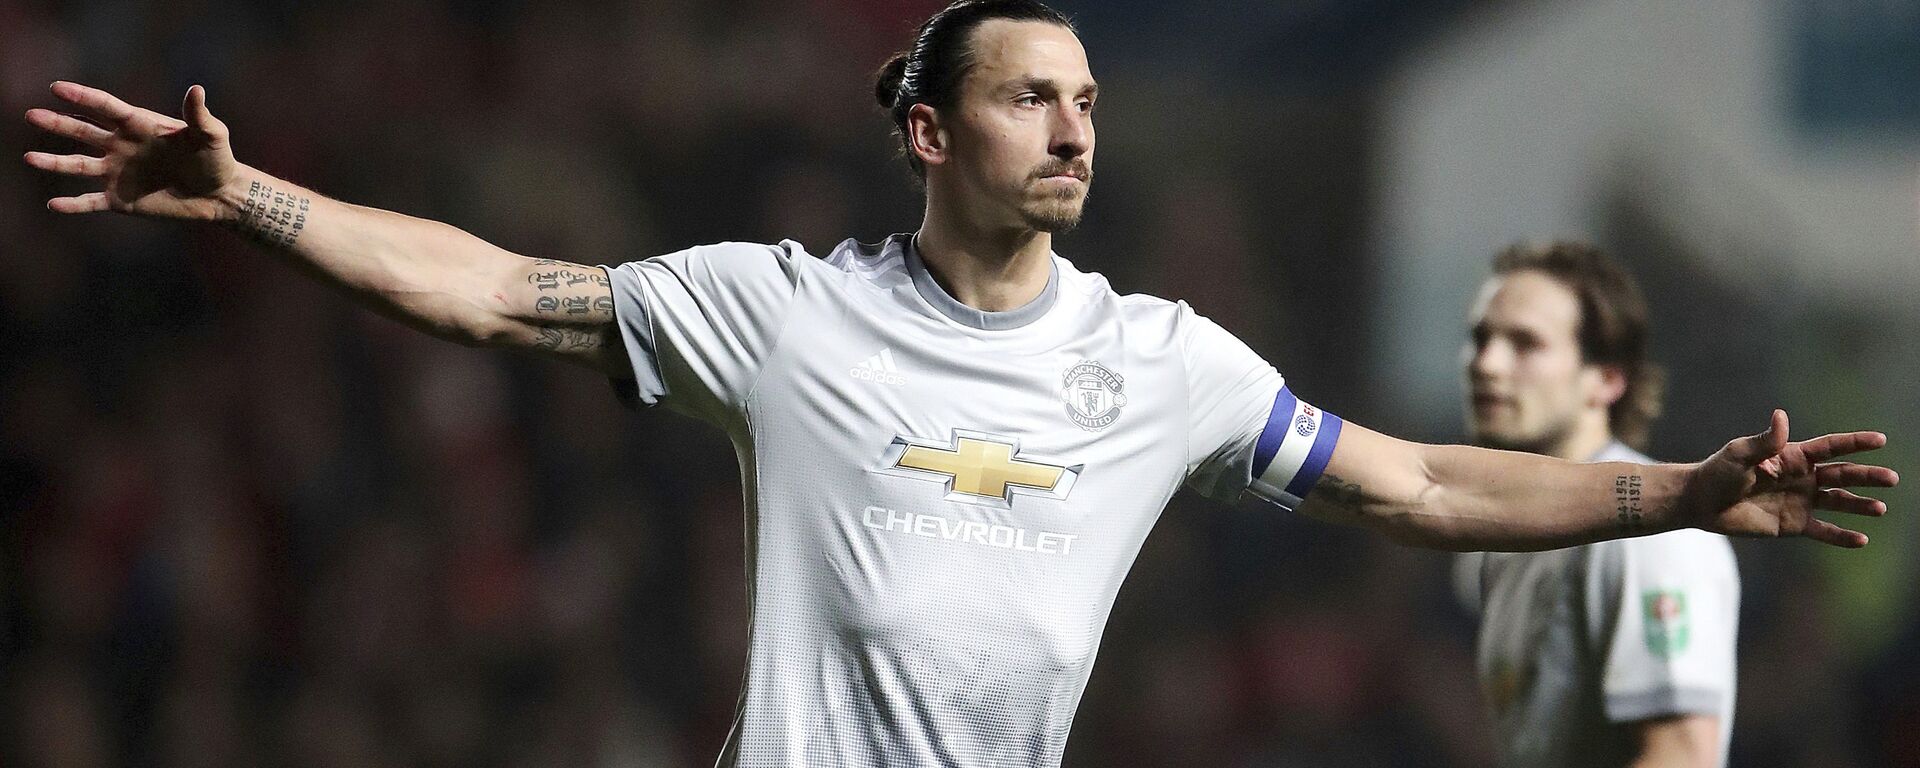 Manchester United's Zlatan Ibrahimovic celebrates scoring his side's first goal of the game during the English League Cup Quarter Final soccer match between Bristol City and Manchester United at Ashton Gate, Bristol, England. (File) - Sputnik International, 1920, 14.12.2021